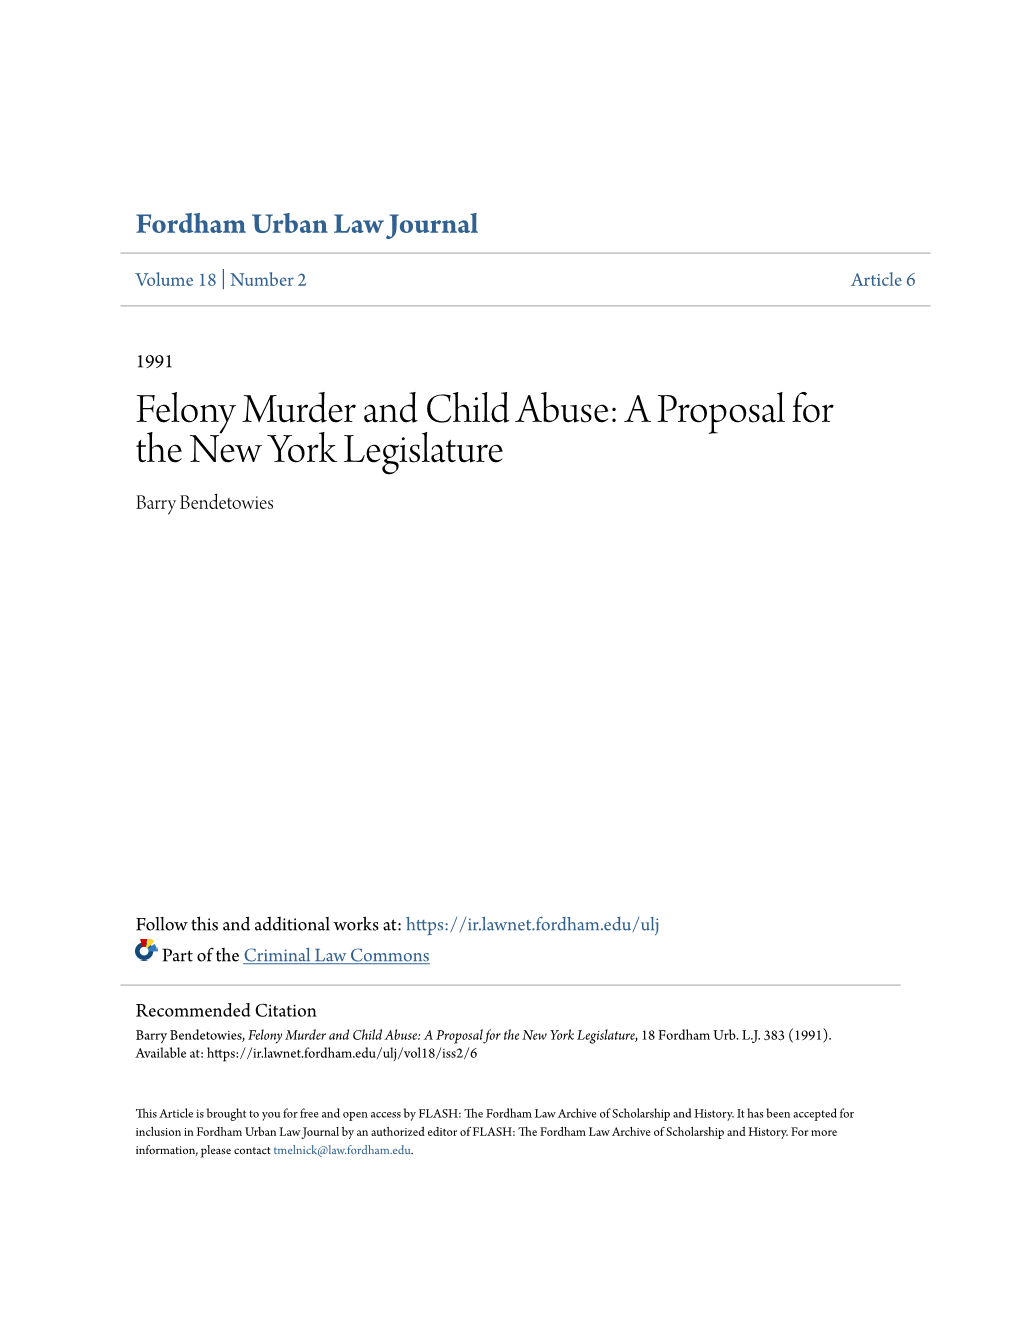 Felony Murder and Child Abuse: a Proposal for the New York Legislature Barry Bendetowies